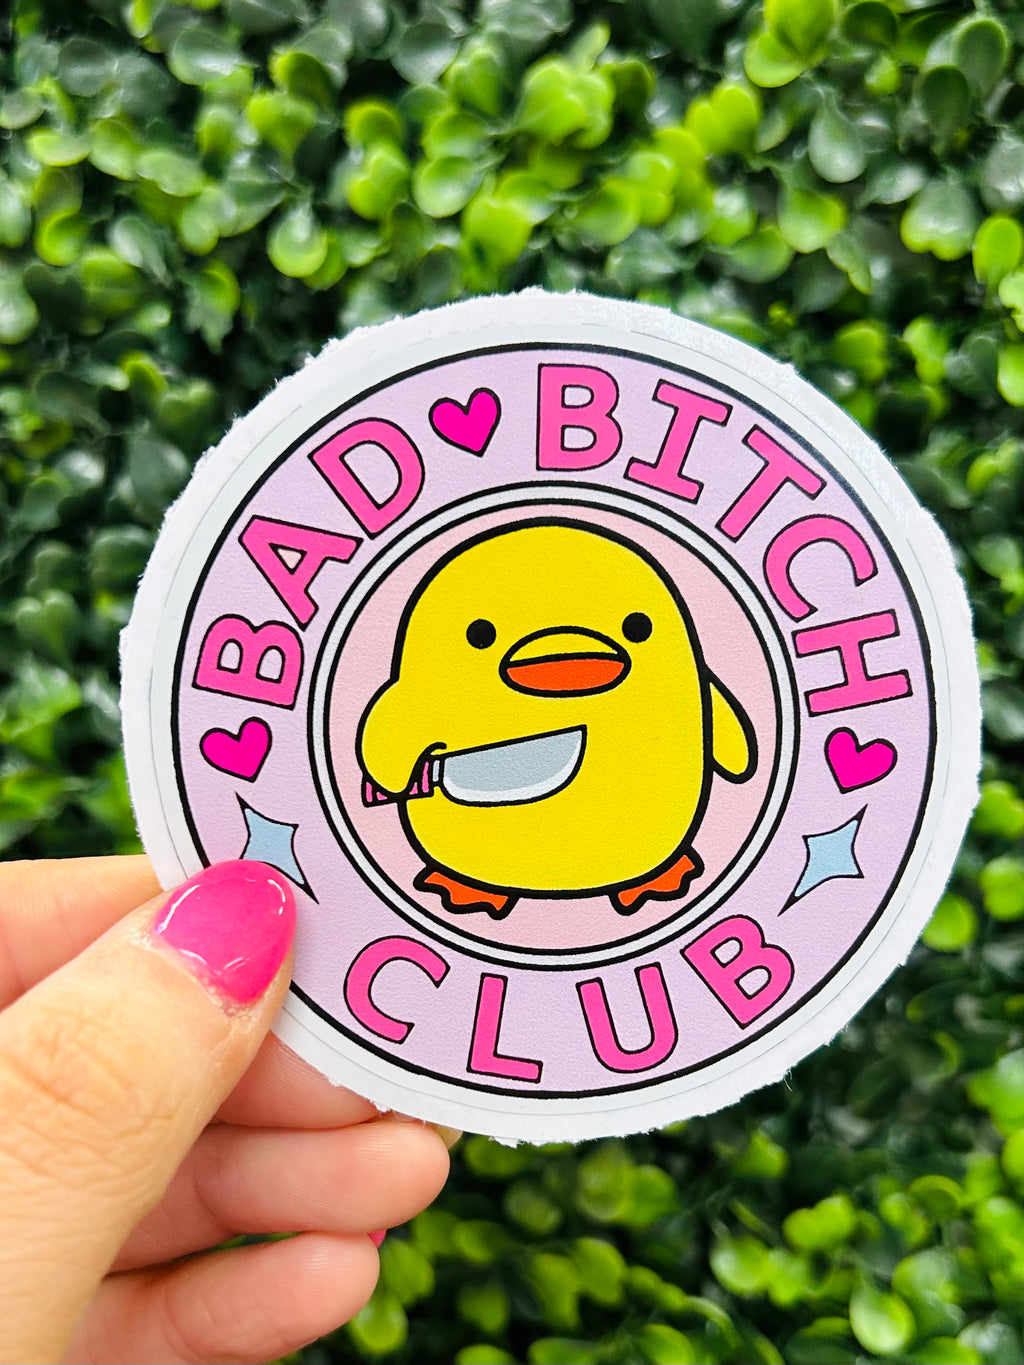 Clear some space on your laptop, water bottle, or car for the ultimate accessory: the Bad Bitch Club Sticker! Featuring a vibrant, pink-yellow ombre design, this sticker will show the world you're not afraid to be your bold, sassy self. Plus, it's a hilarious way to let people know that you're part of the exclusive squad. - it's time for the Bad Bitch Club to shine!